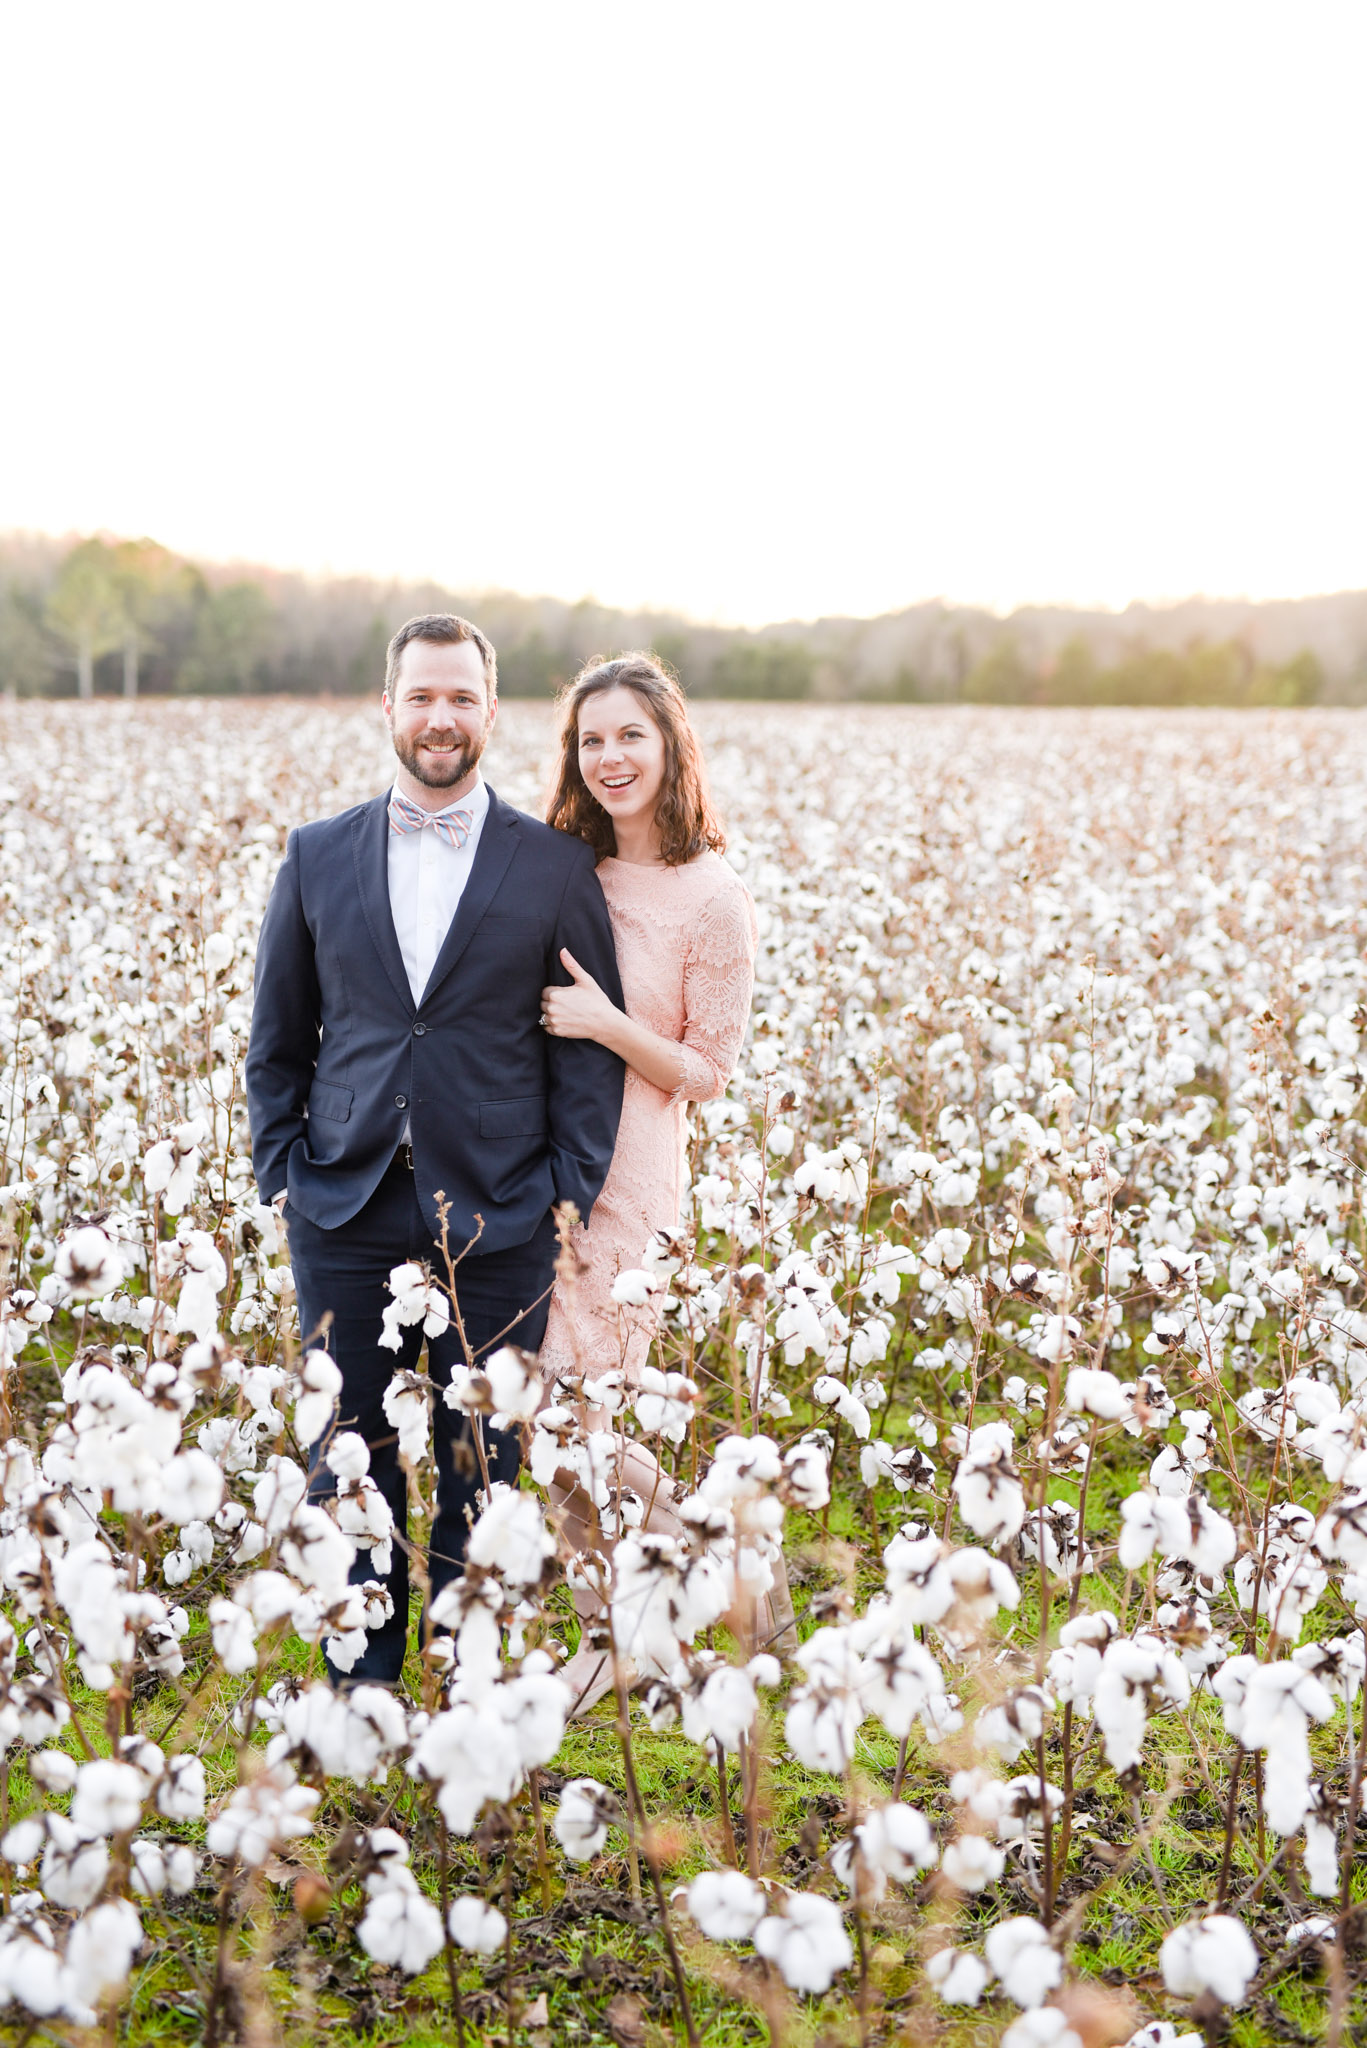 Couple smiles at camera in cotton field.